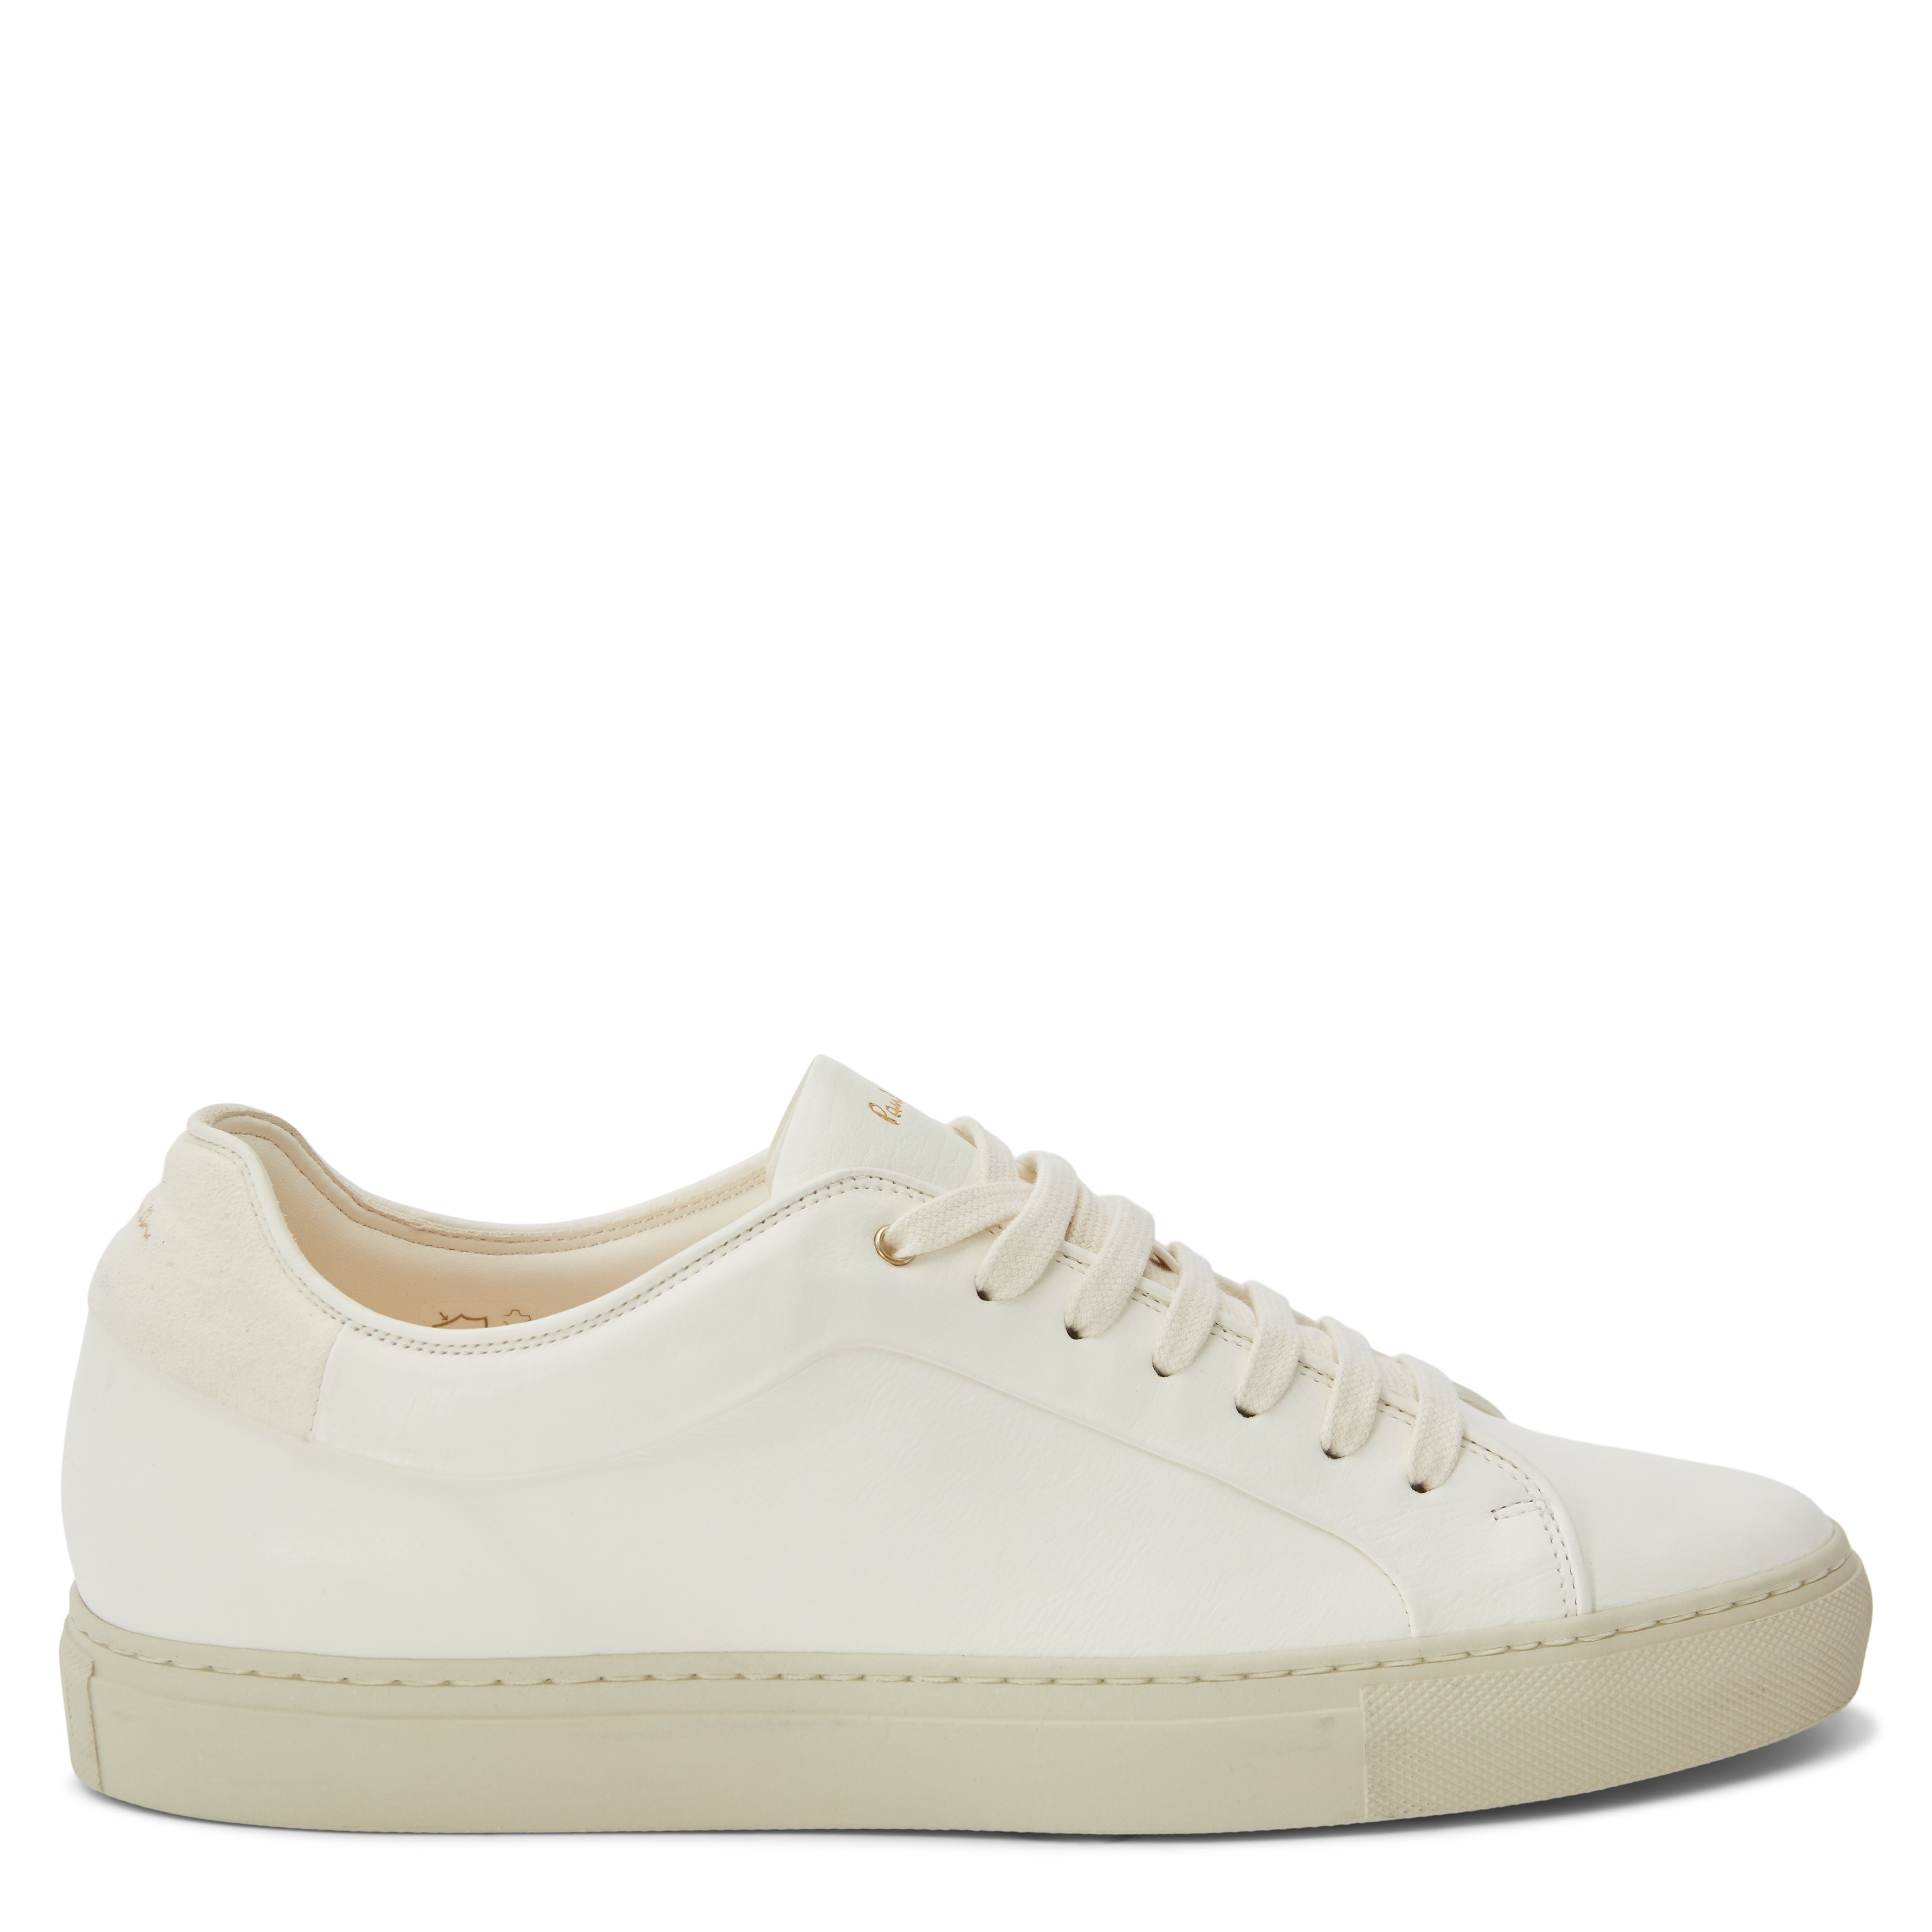 Paul Smith Shoes Shoes BSE02 GECO BASSO White